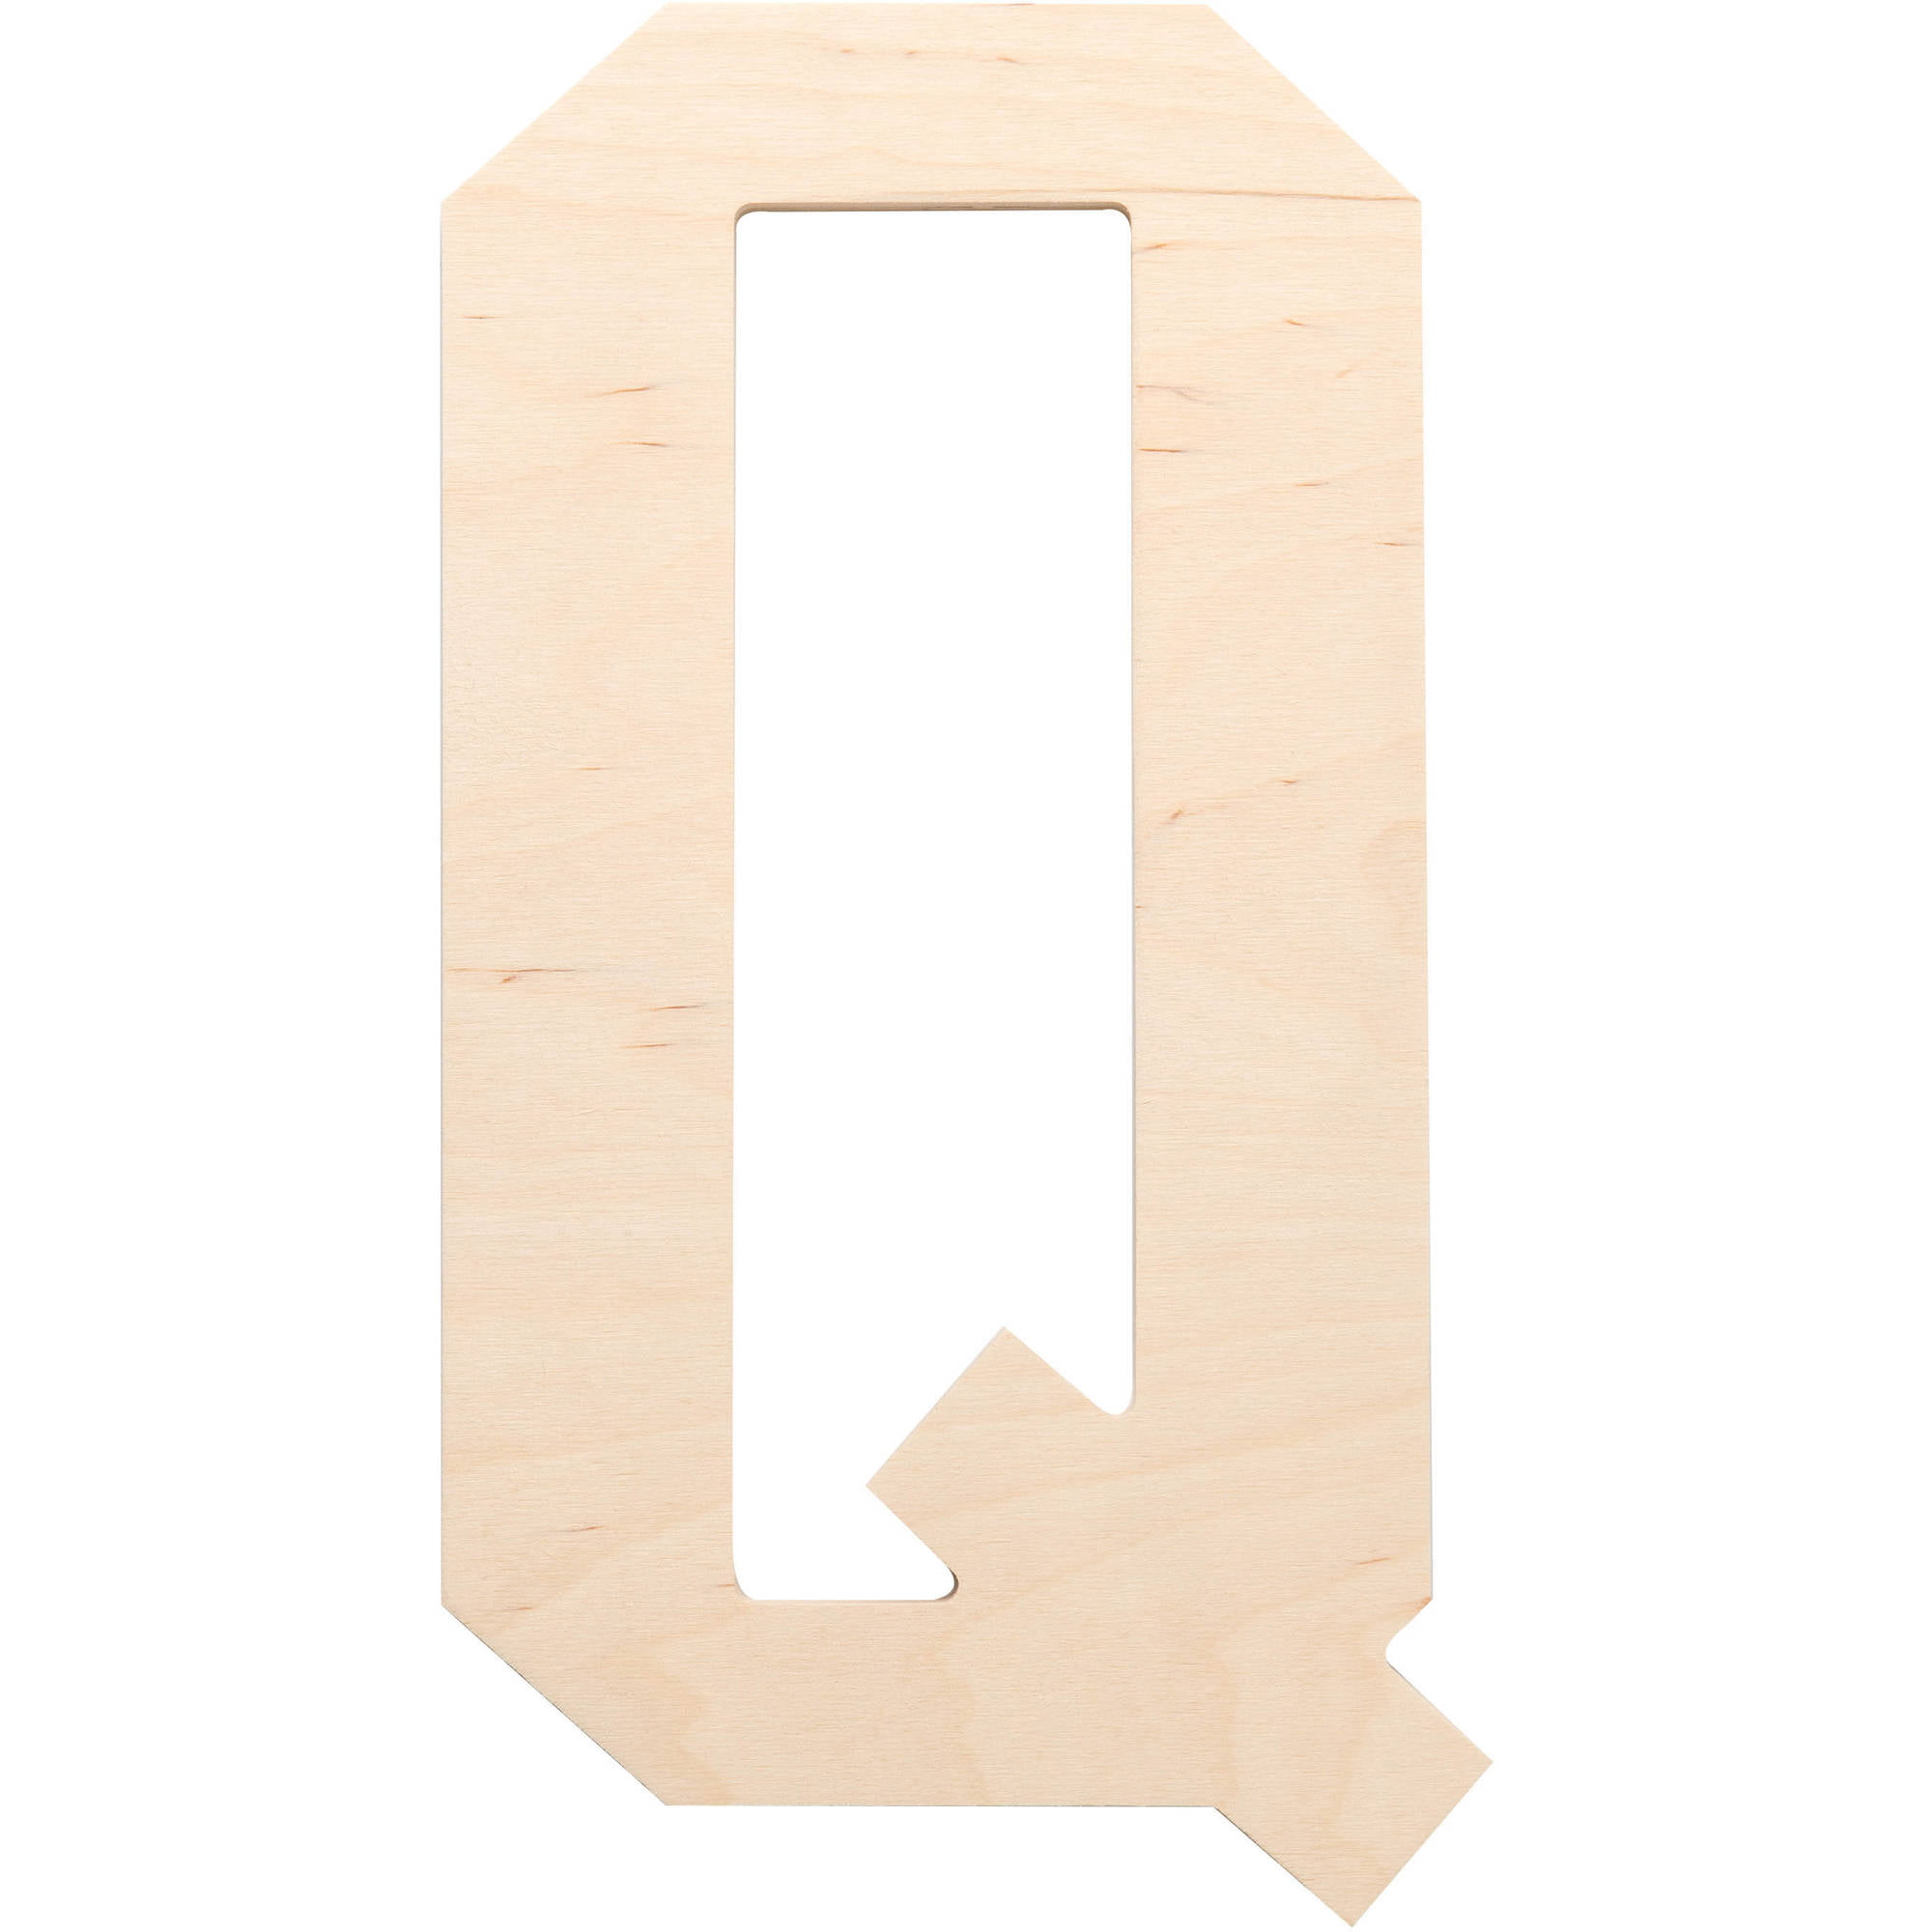 Good Wood by Leisure Arts Letter 13 No 2, Wooden Letters, Wood